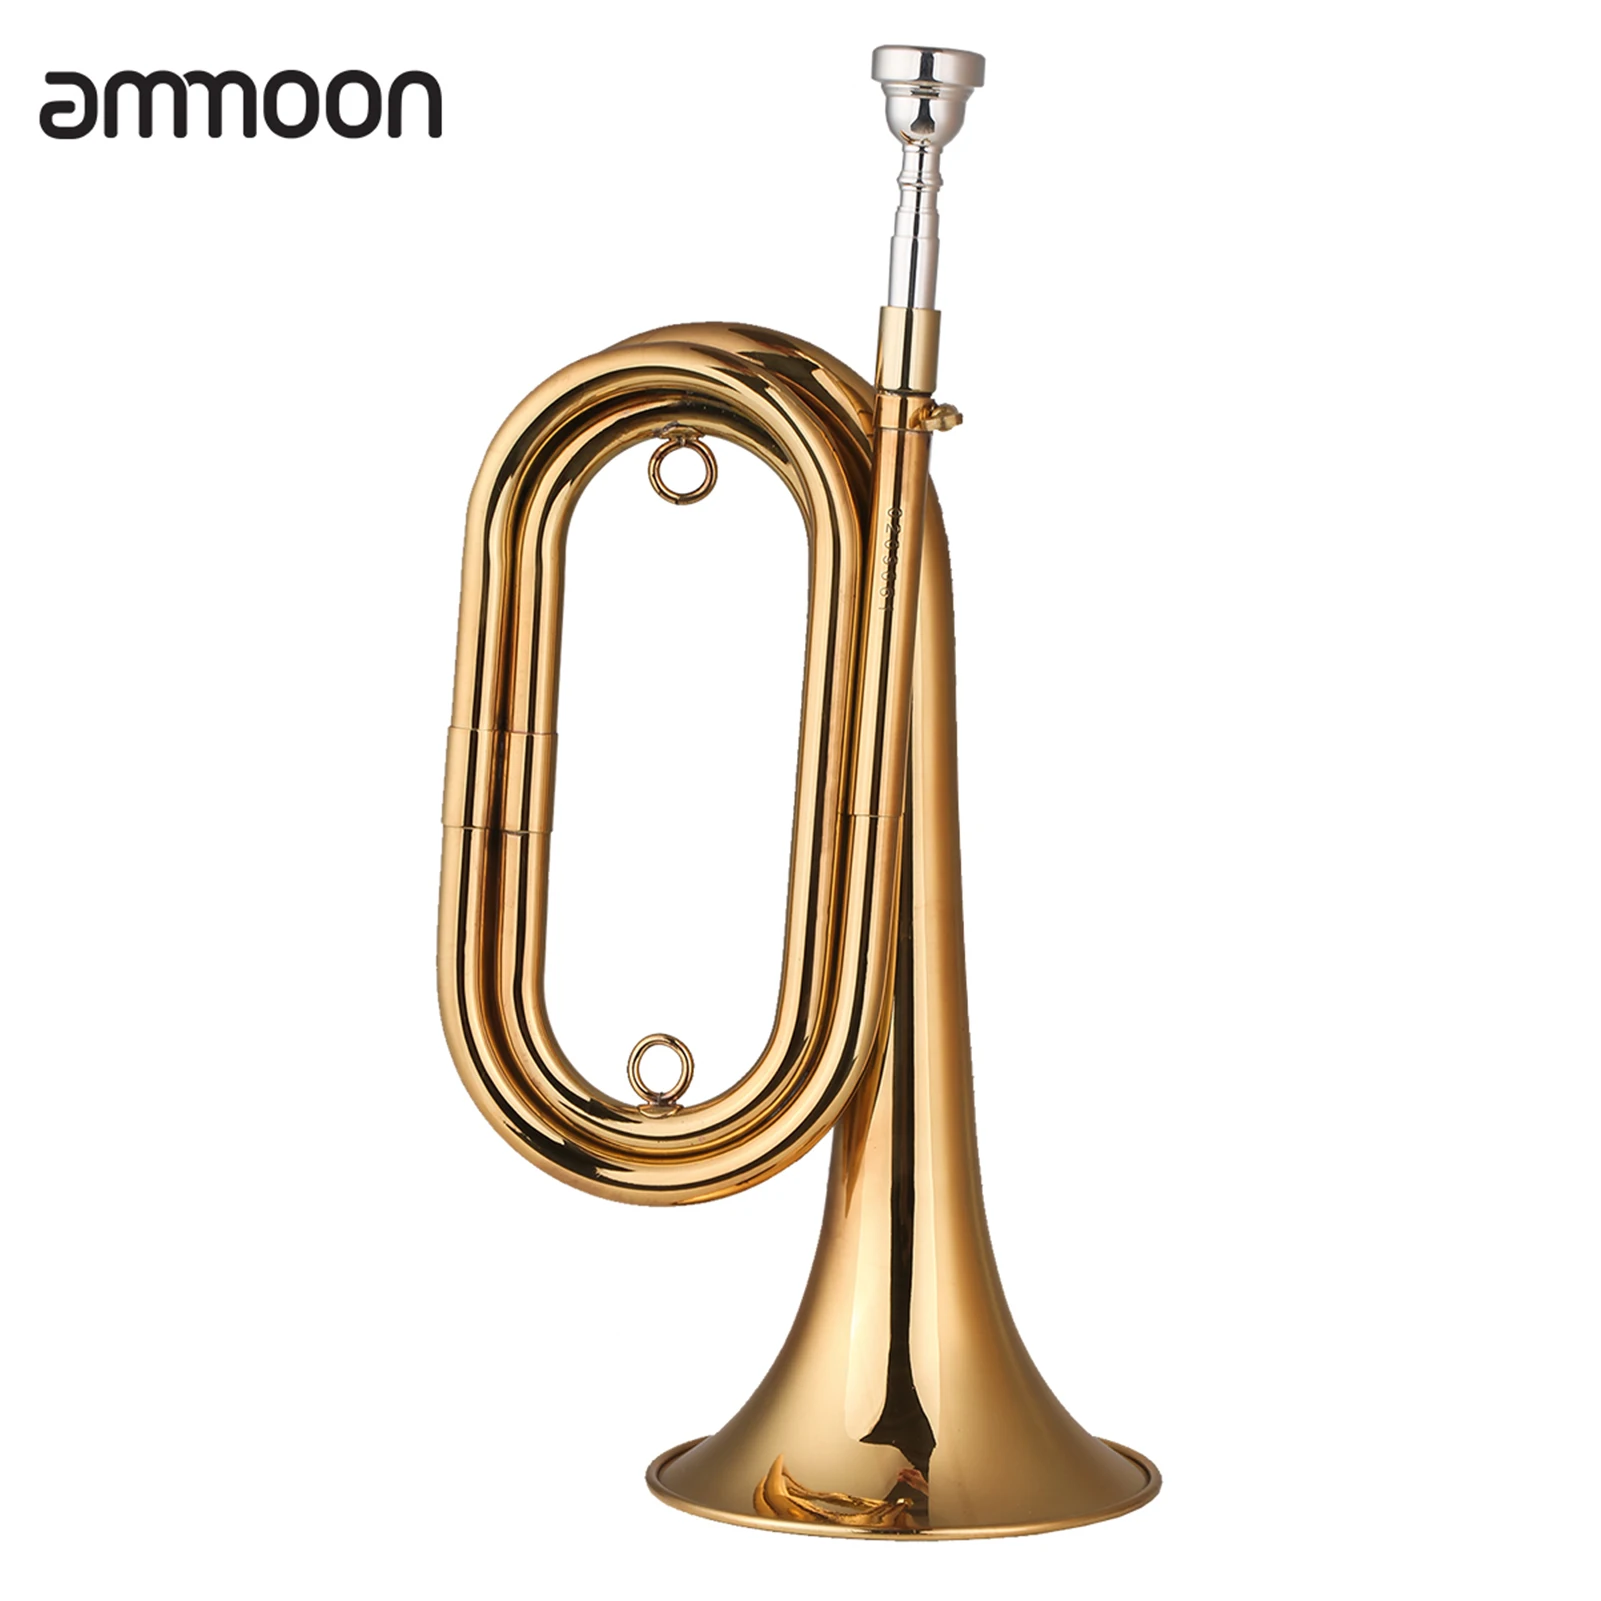 

ammoon Brass Bugle Call Gold-Plated Trumpet Cavalry Horn with Mouthpiece Carrying Bag Musical Instrument for Beginner Band play